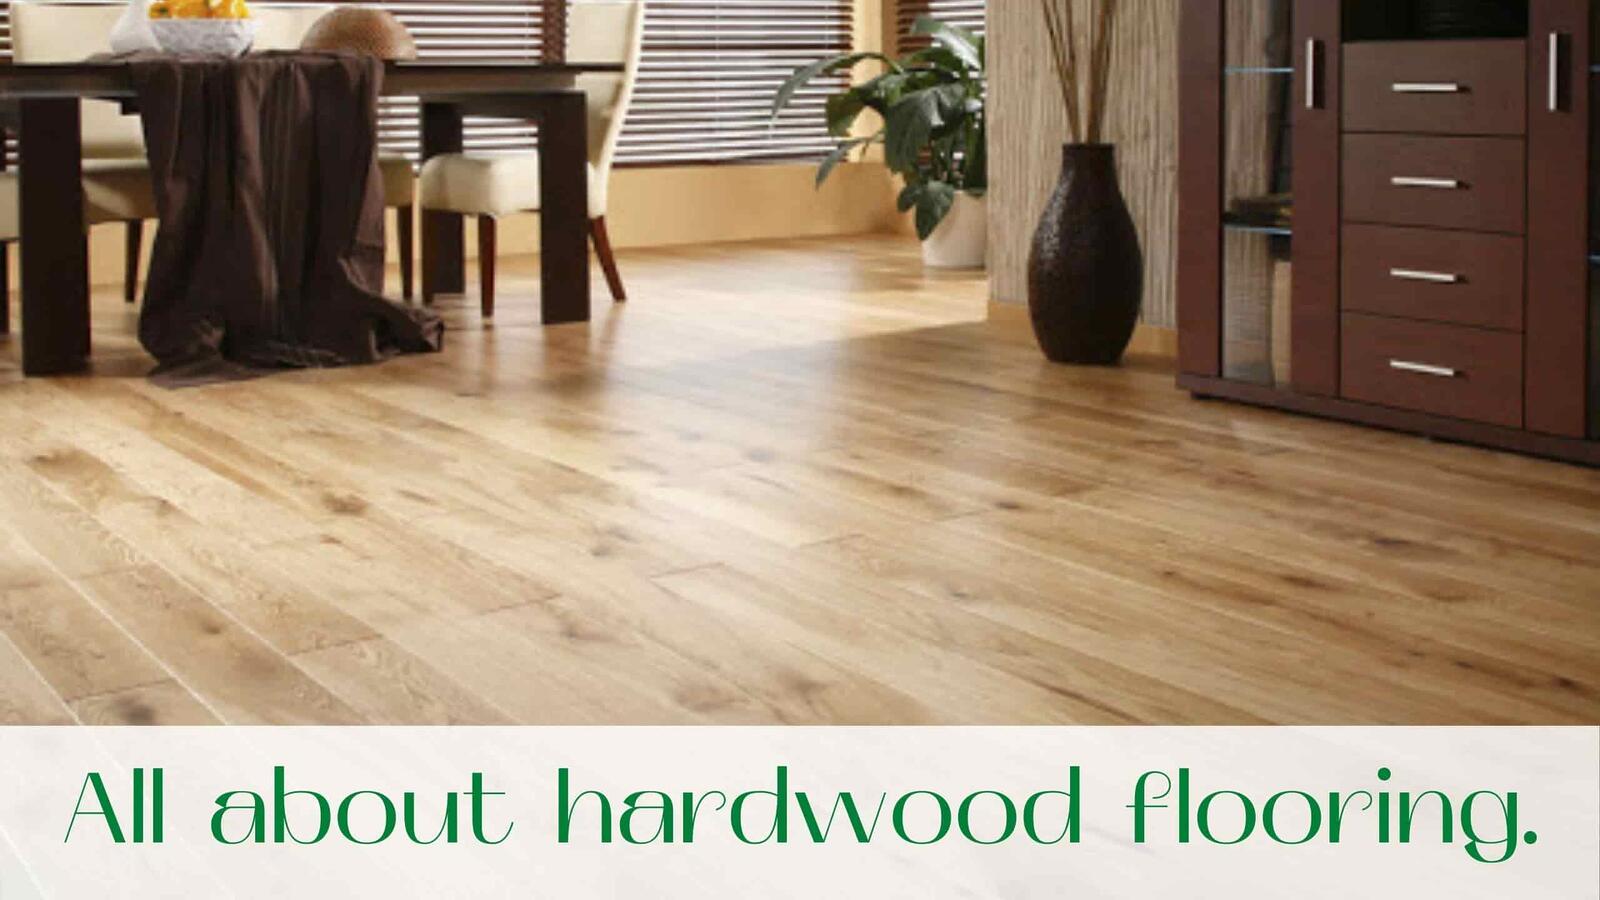 All about hardwood flooring in Toronto and Ontario